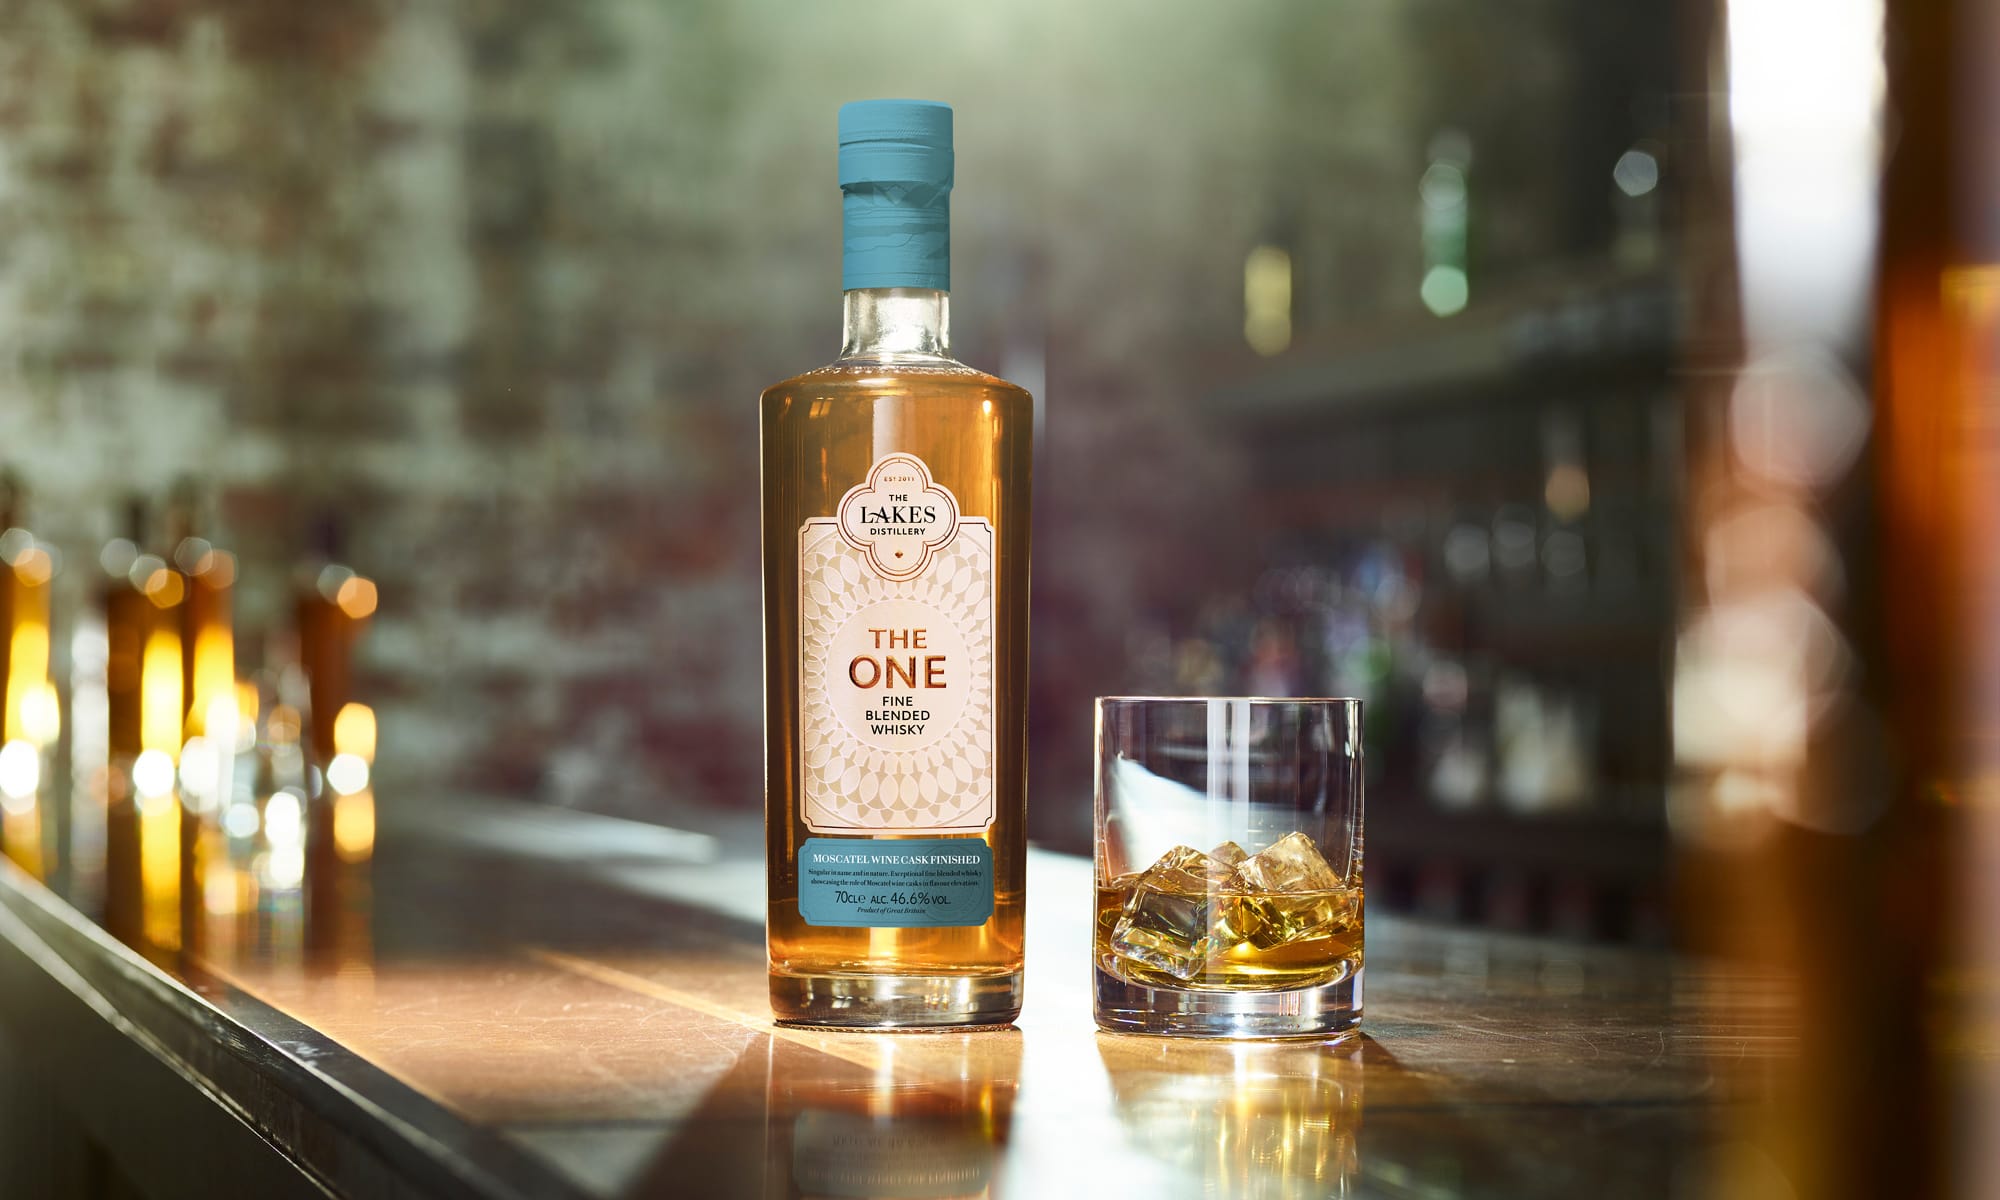 The Lakes Distillery launch The One Moscatel Wine Cask Finish